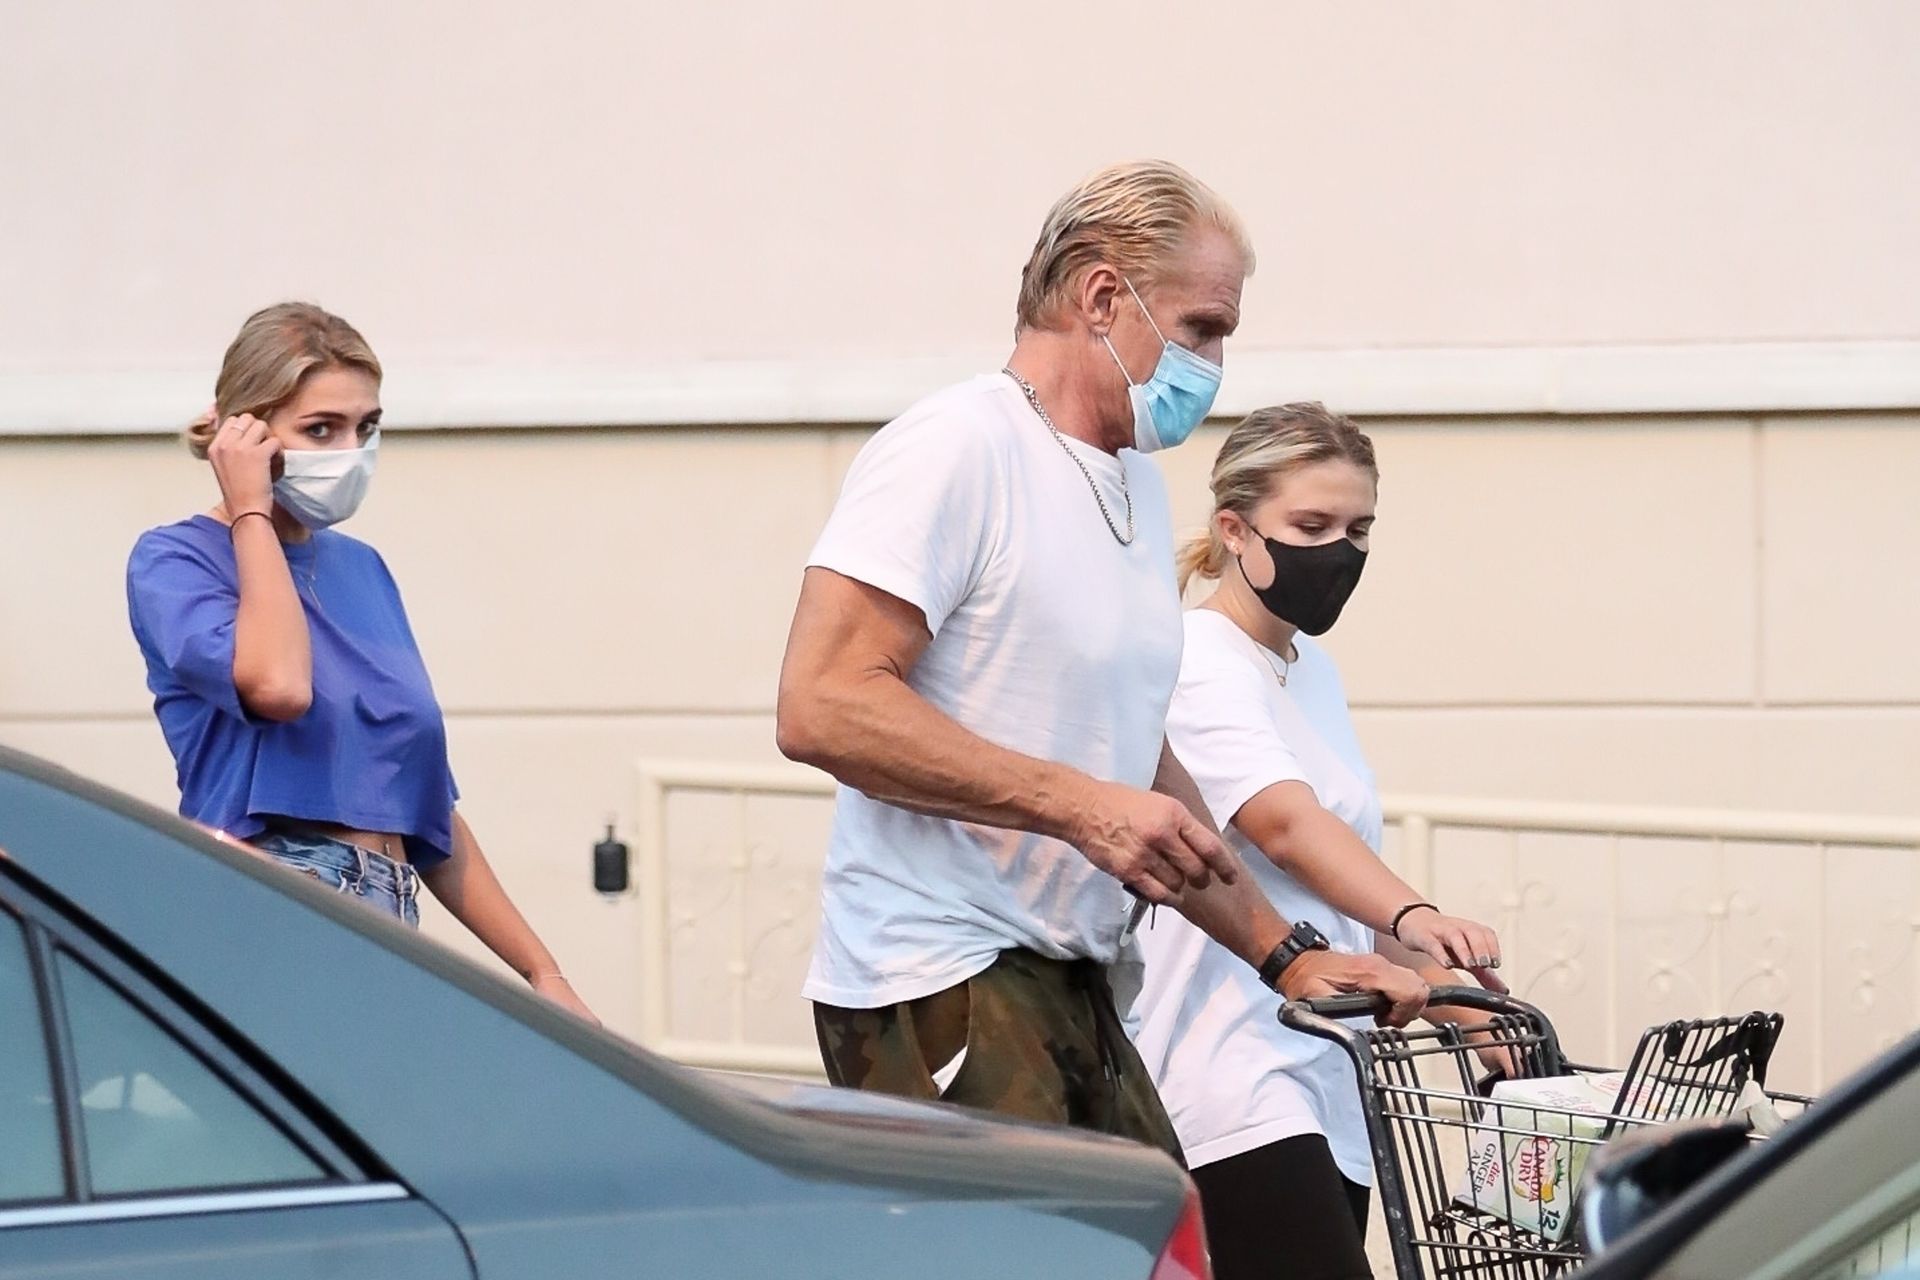 Dolph Lundgren  Emma Krokdal Pick Up Groceries at Gelson’s in West Hollywood (14 Photos)